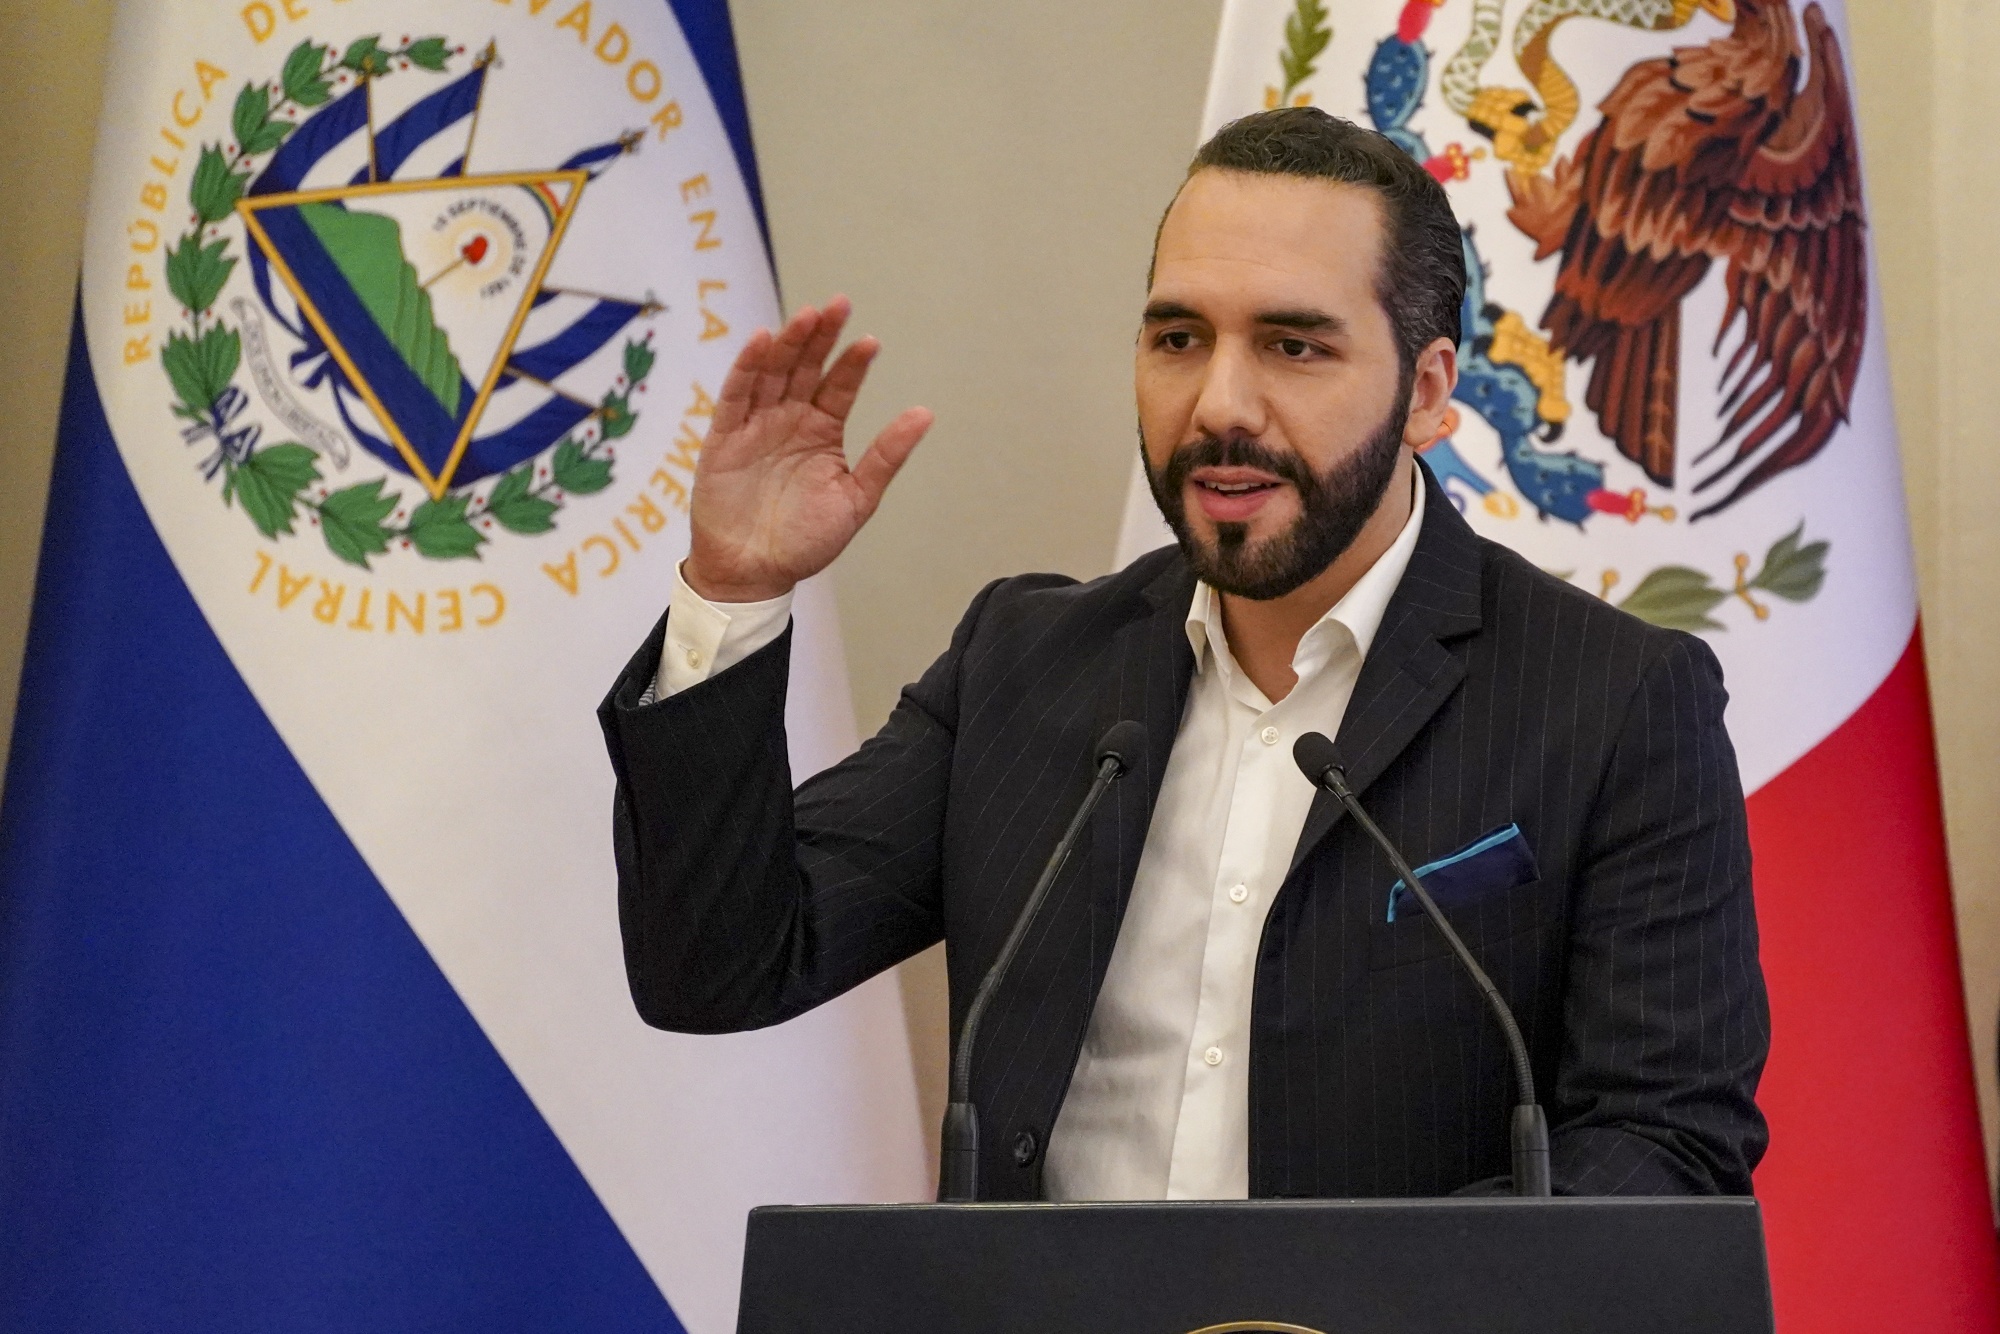 Bitcoin rally: El Salvador president has 'no intention of selling' crypto -  MarketWatch